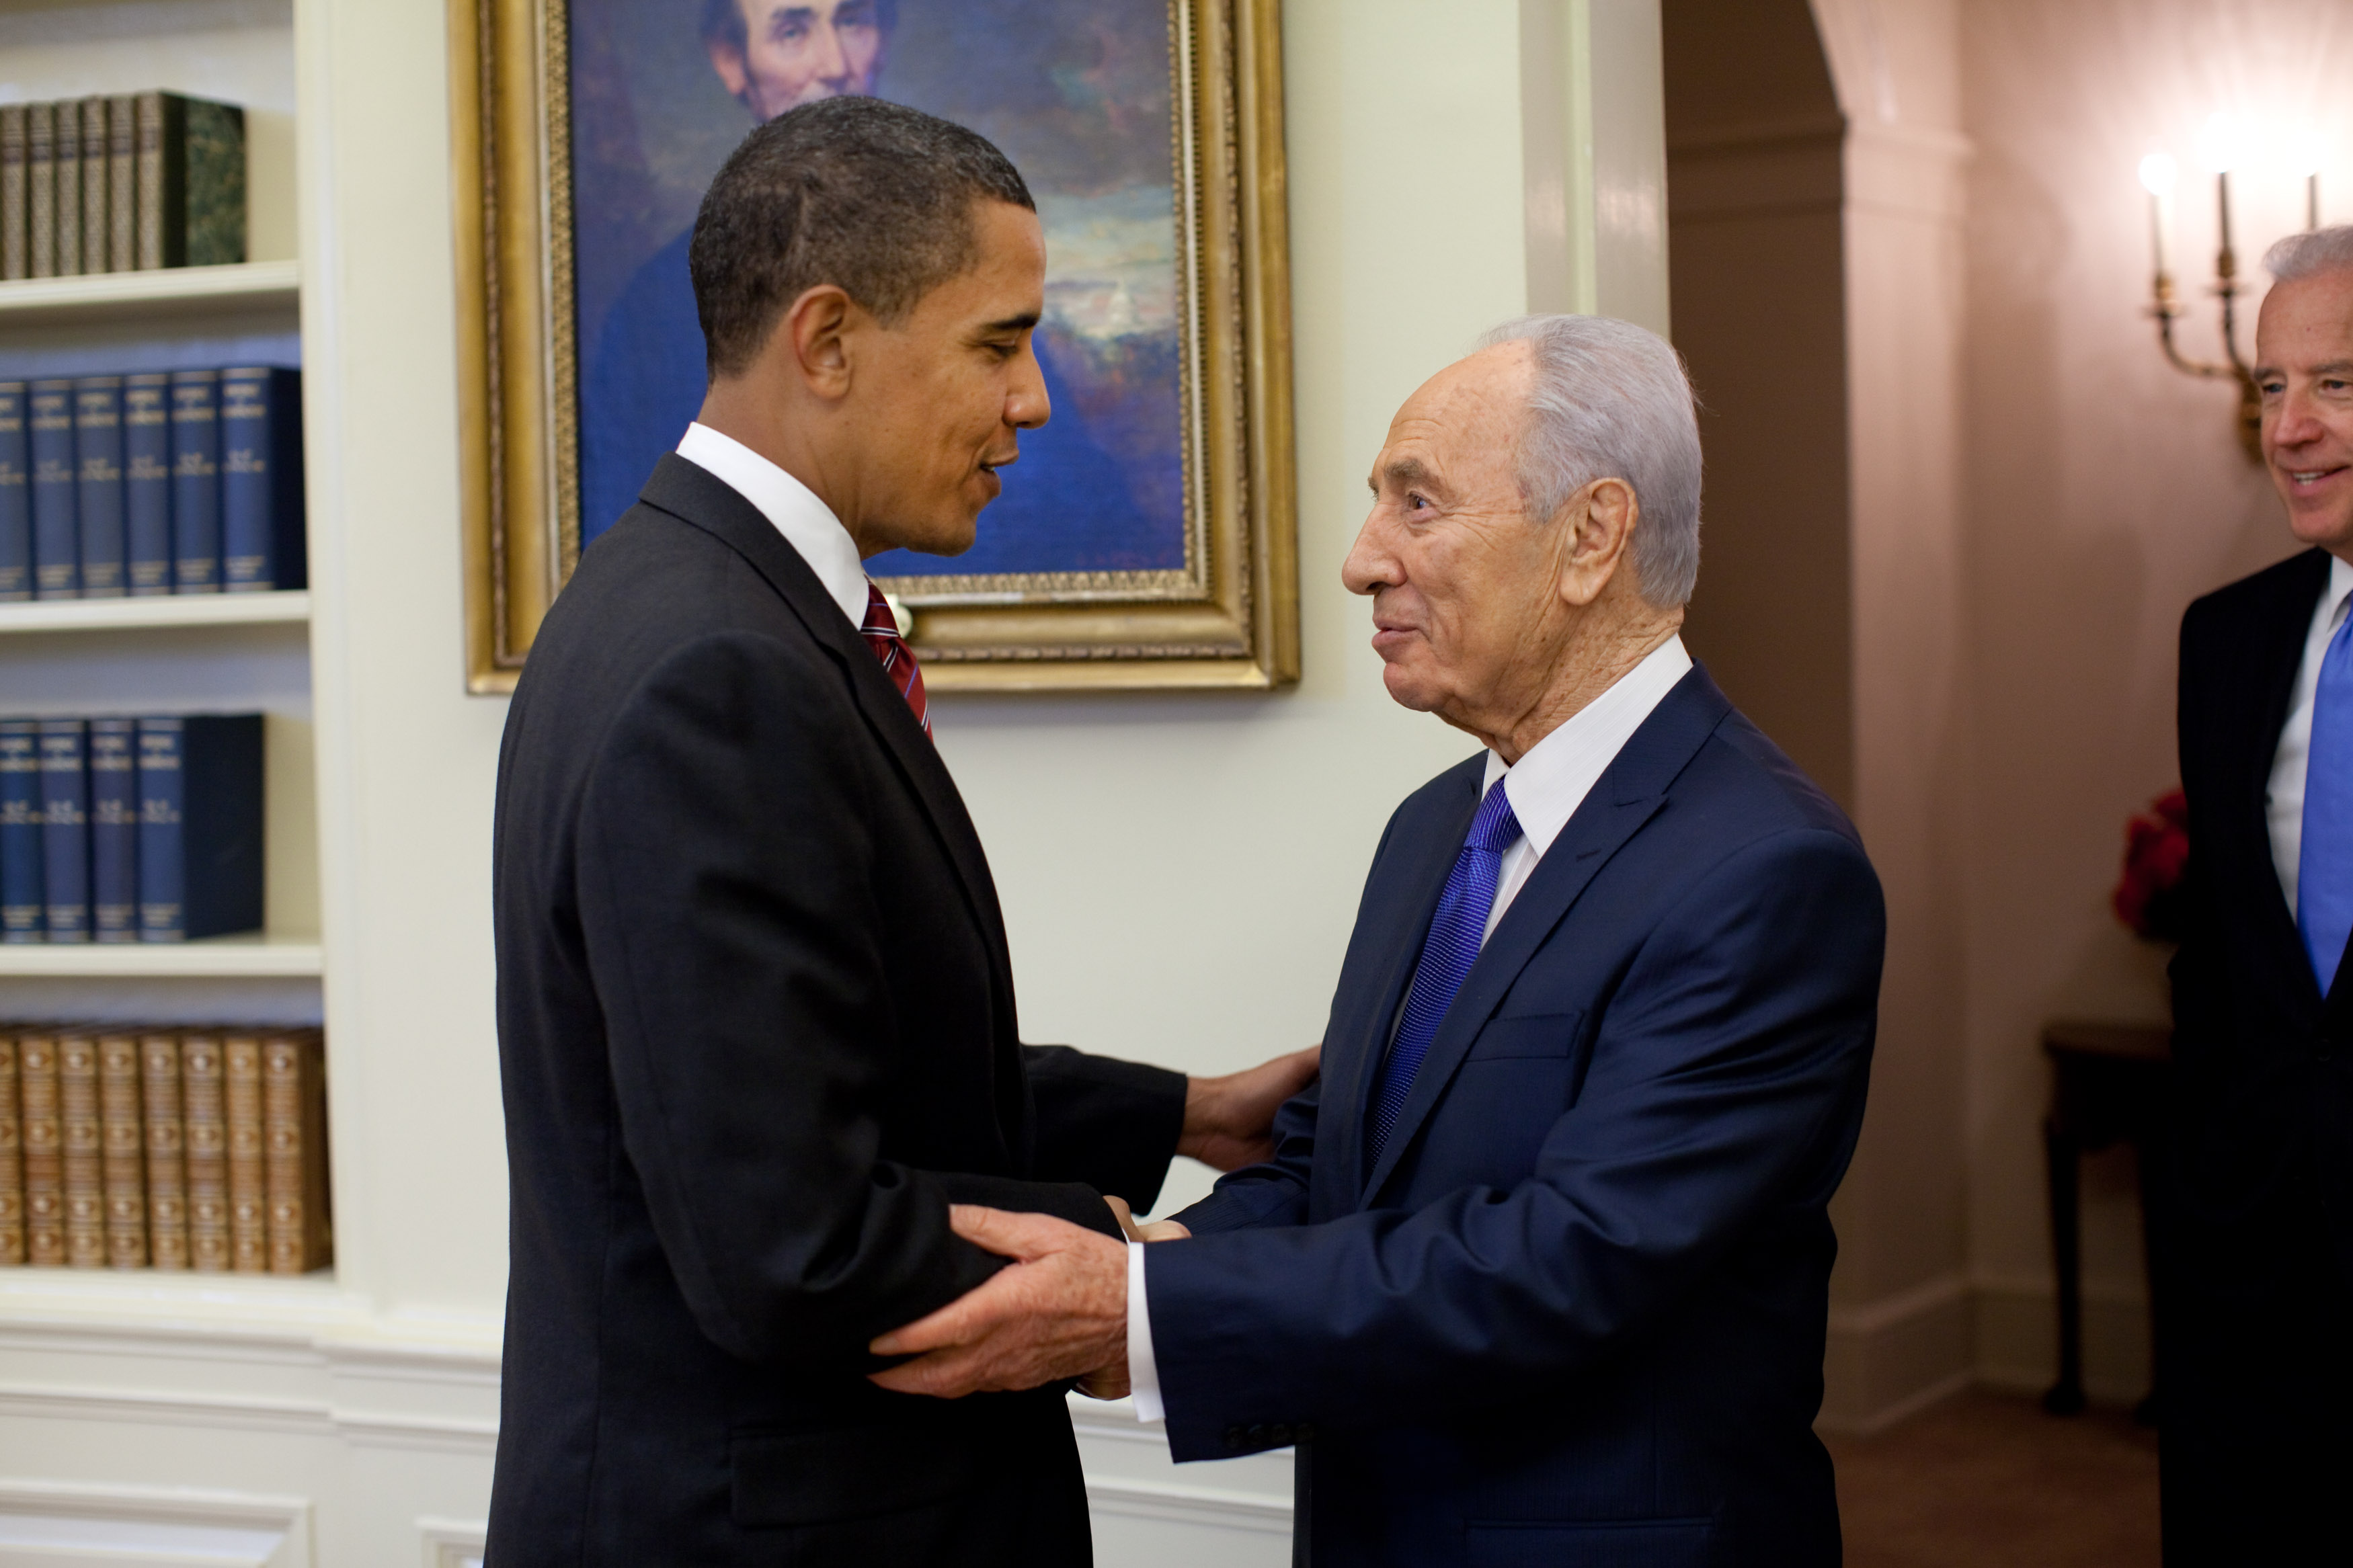 President Barack Obama welcomes Israeli President Shimon Peres in the Oval Office Tuesday, May 5, 2009. At right is Vice President Joe Biden. Official White House Photo by Pete Souza